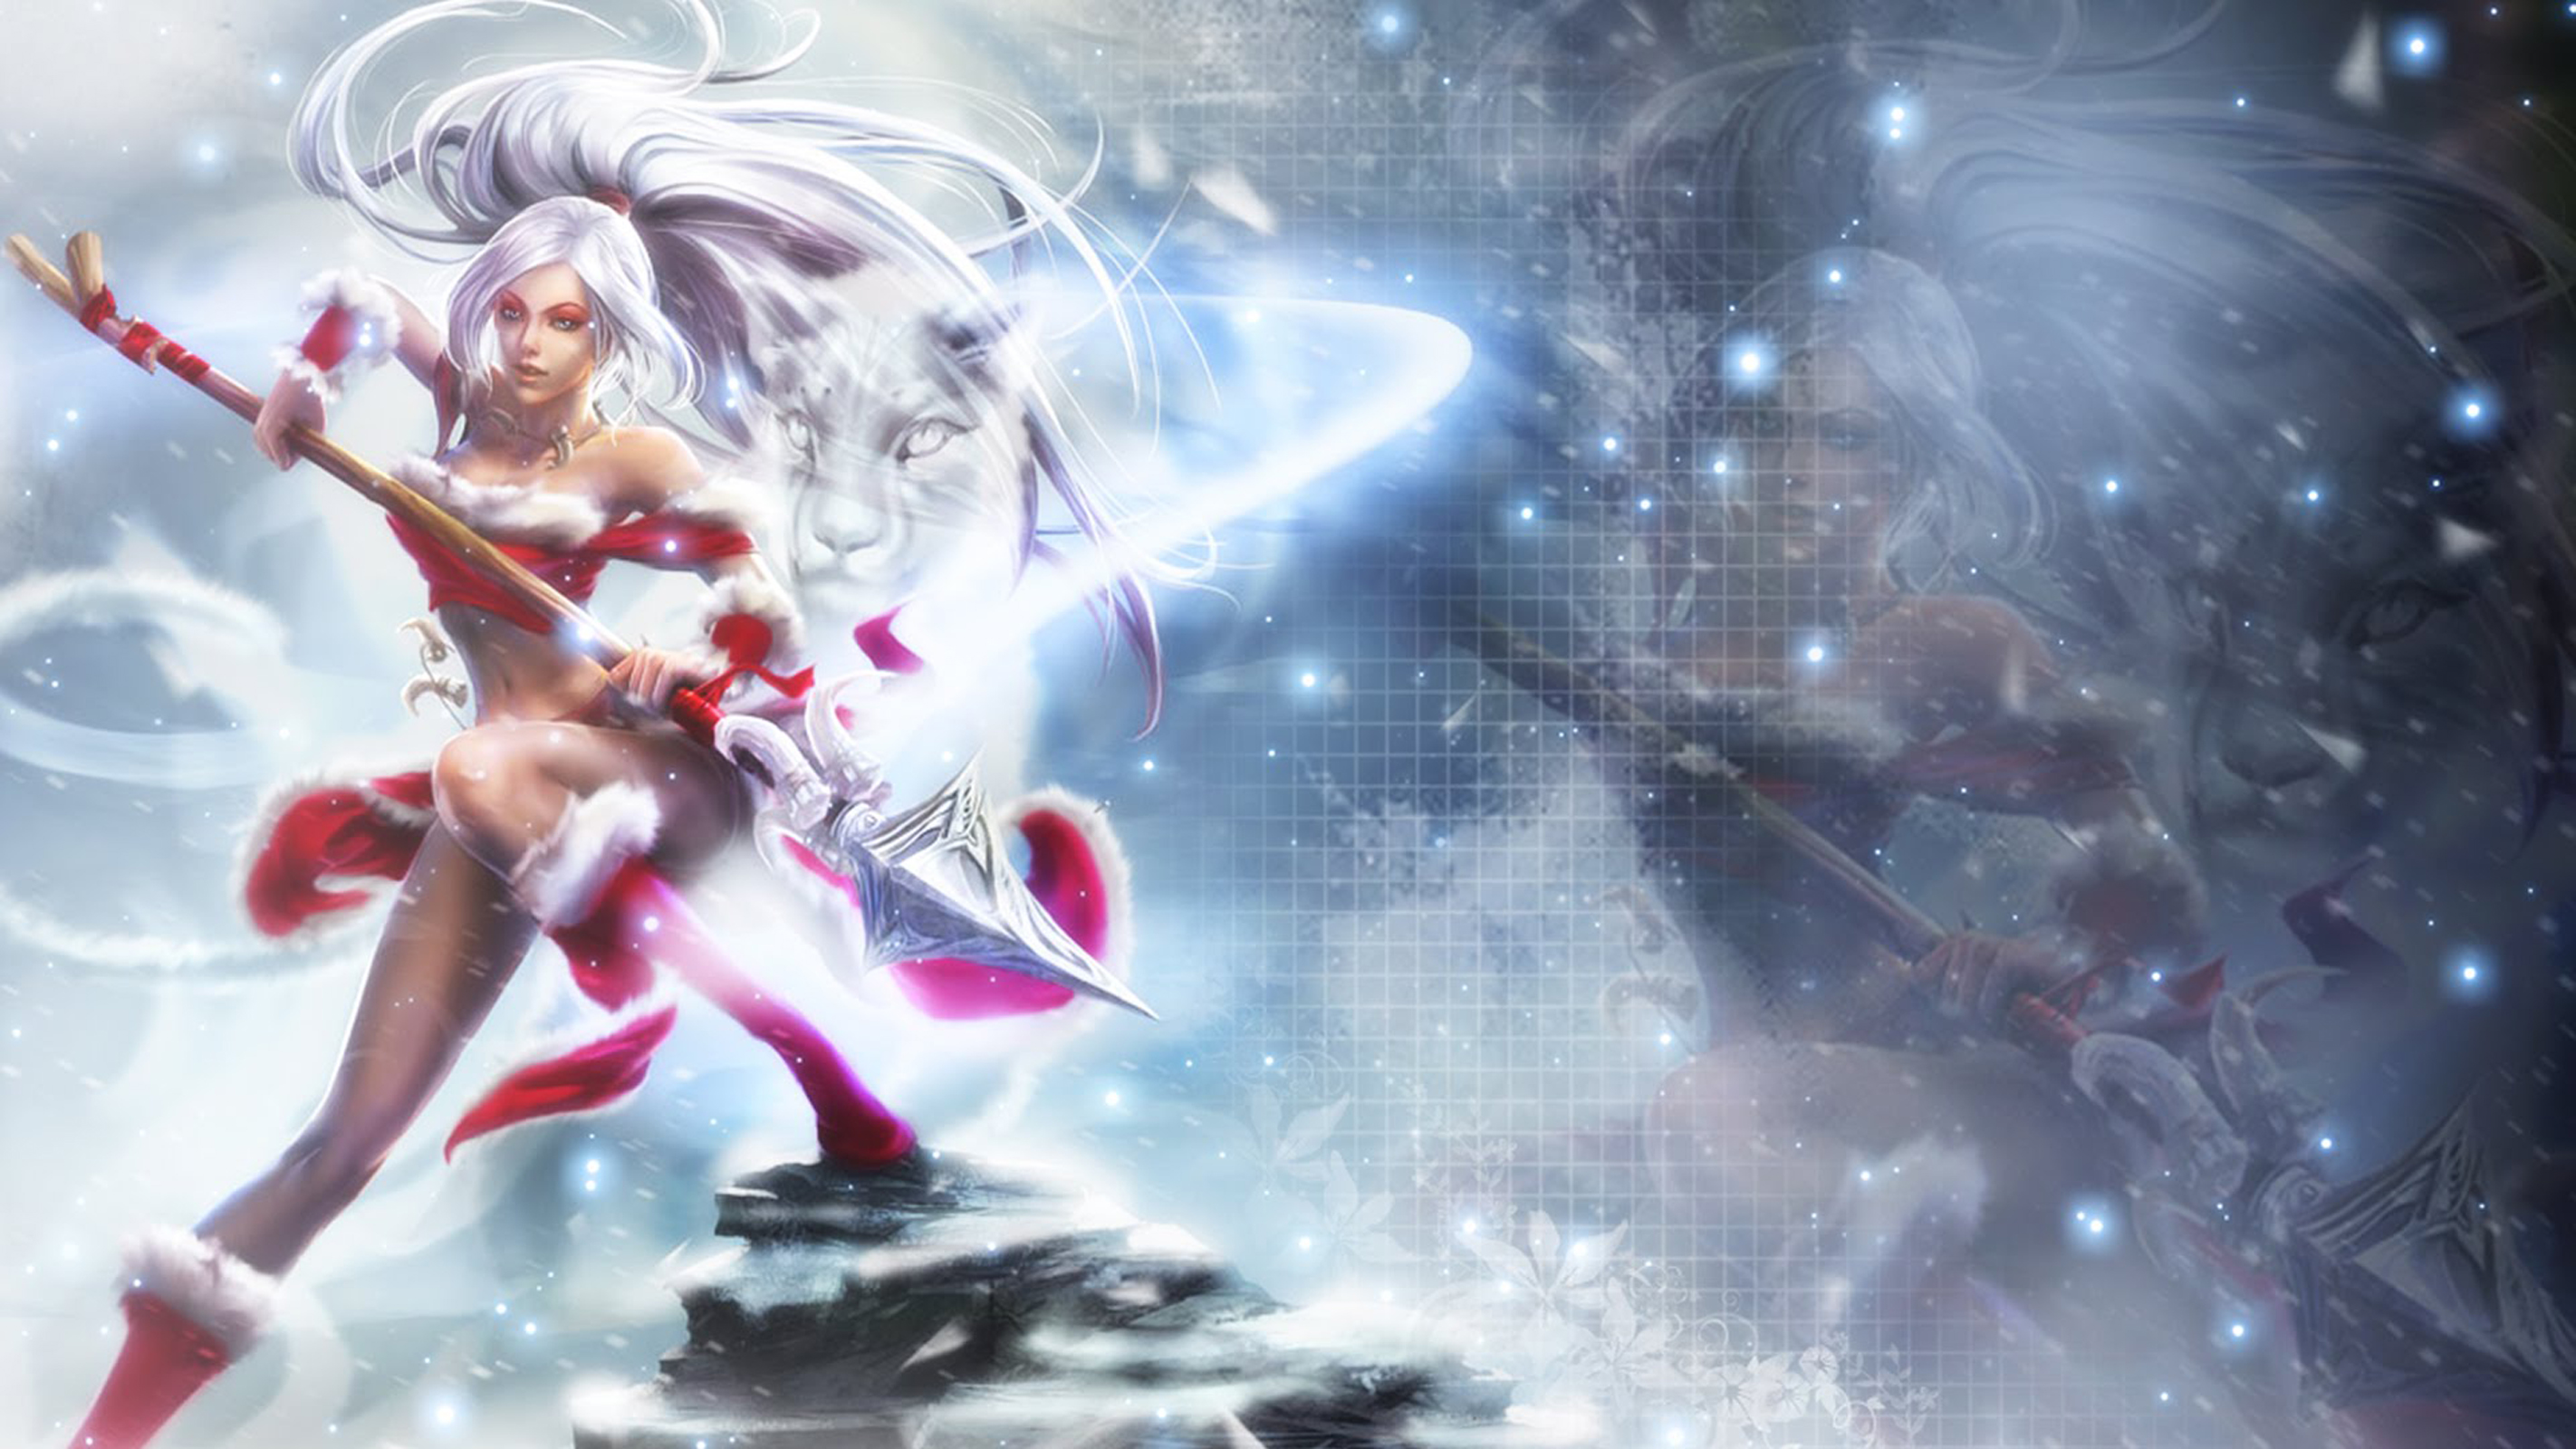 Nidalee-fighter-Skins-League of Legends-Top Wallpapers HD-1920x1080